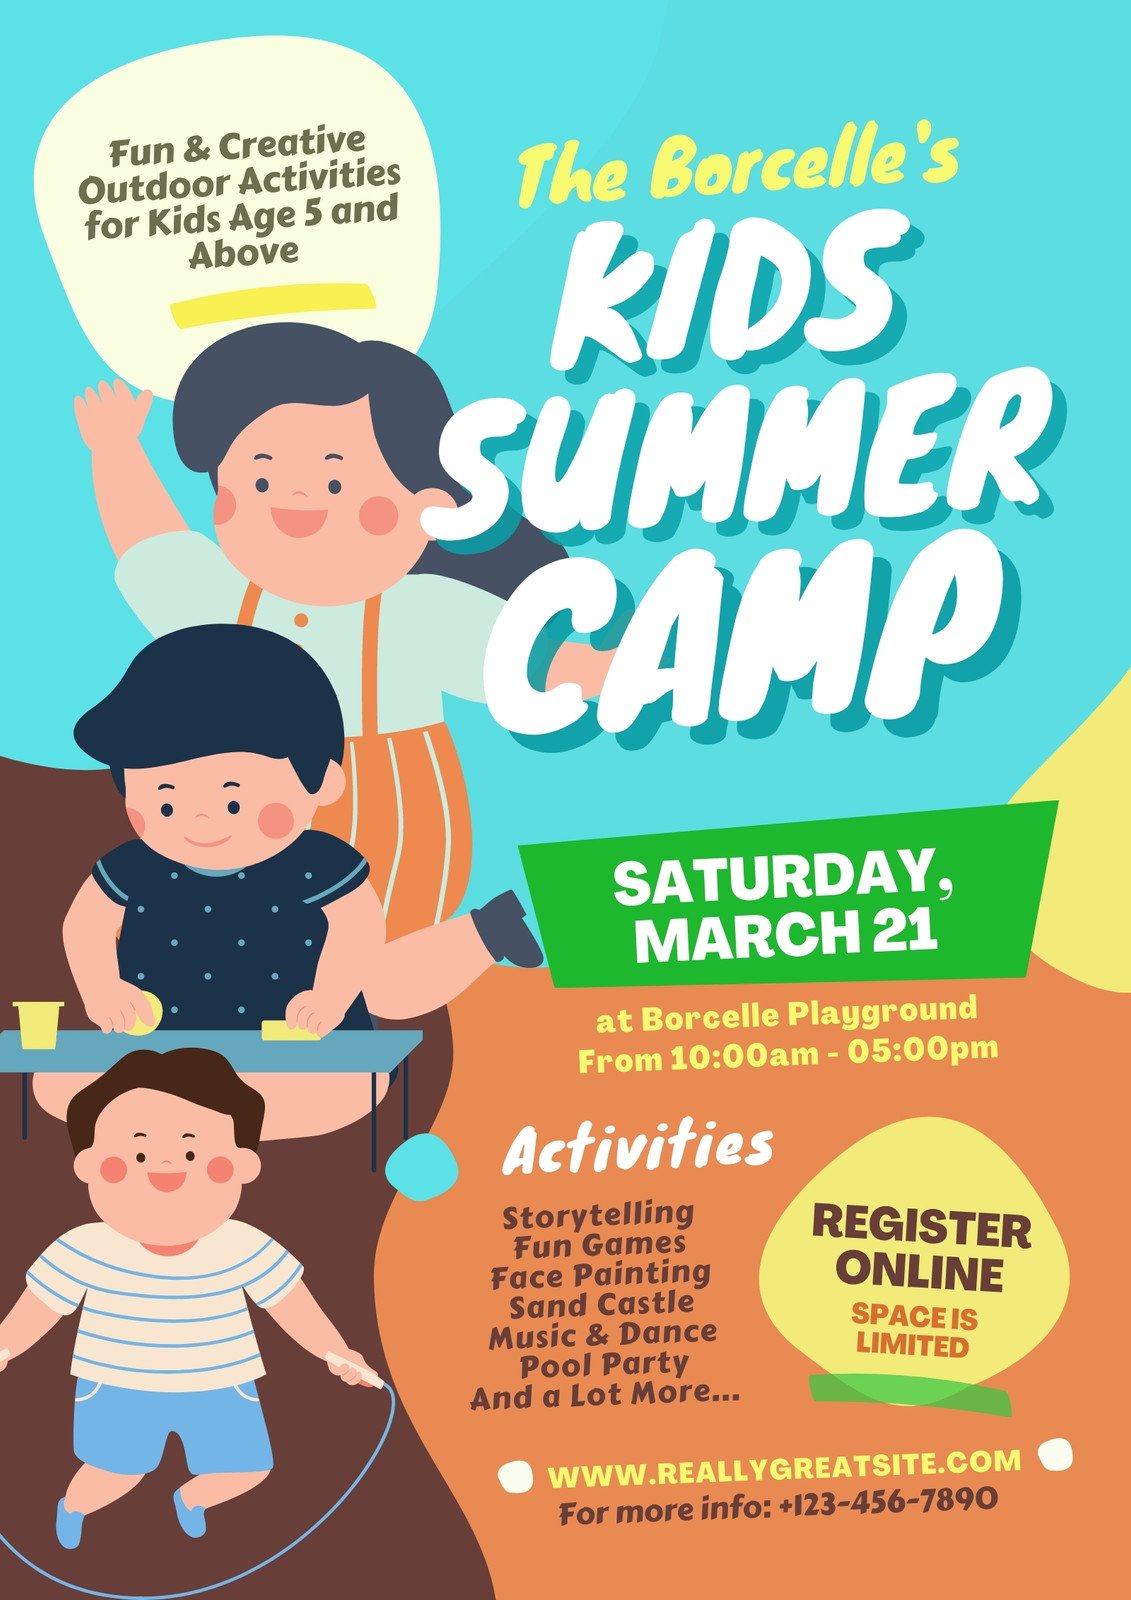 summer camp poster template free